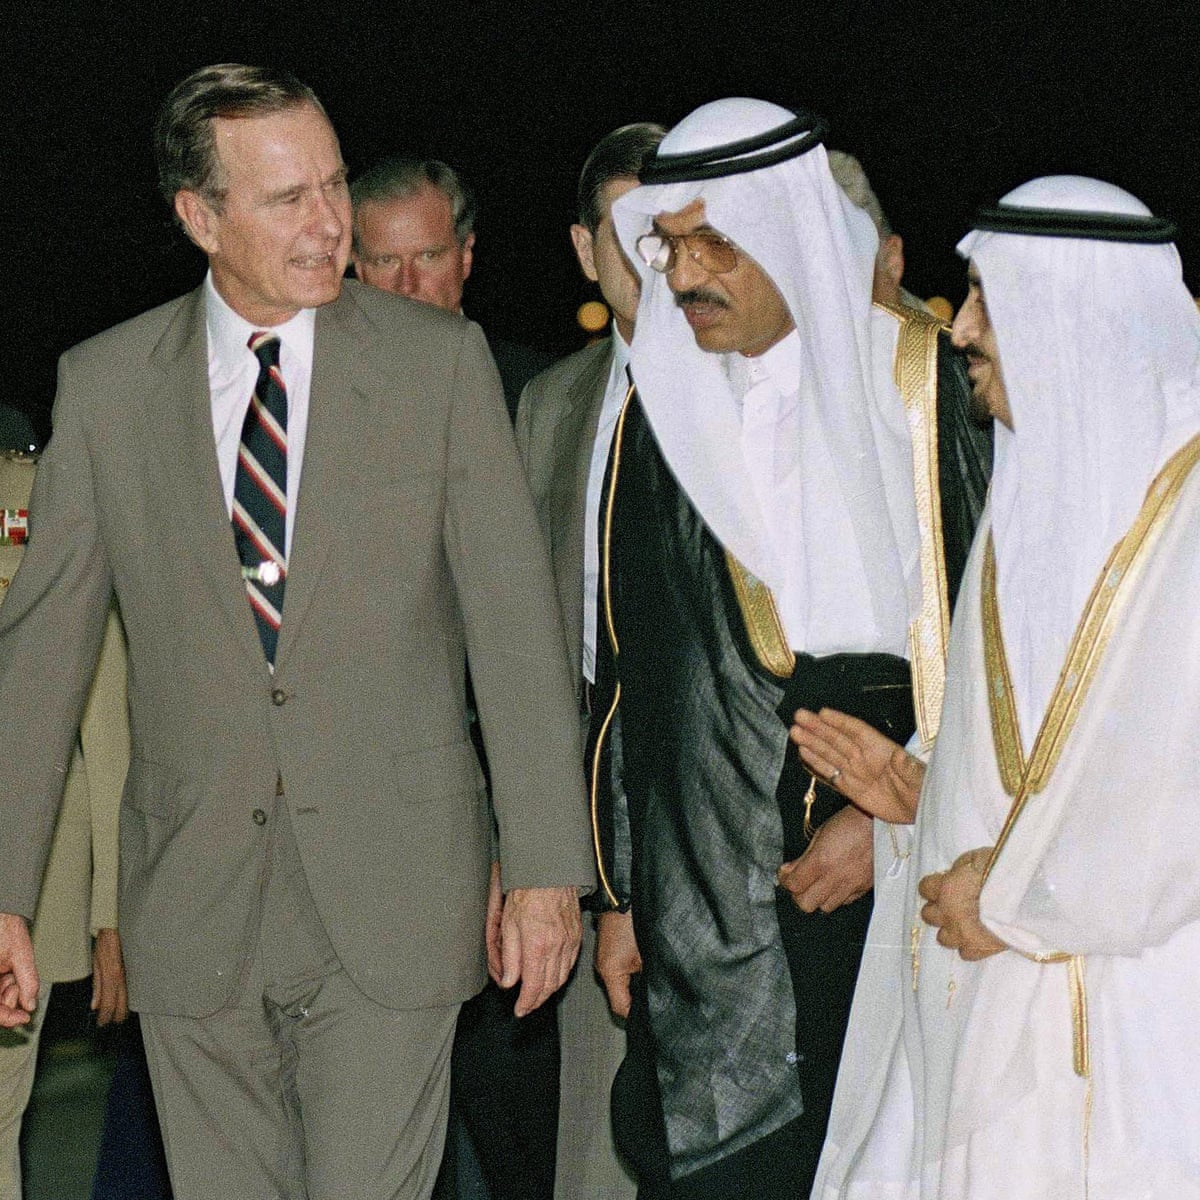 Bush S Sordid Saudi Ties Set Template For Trump He Was Just More Subtle Us News The Guardian